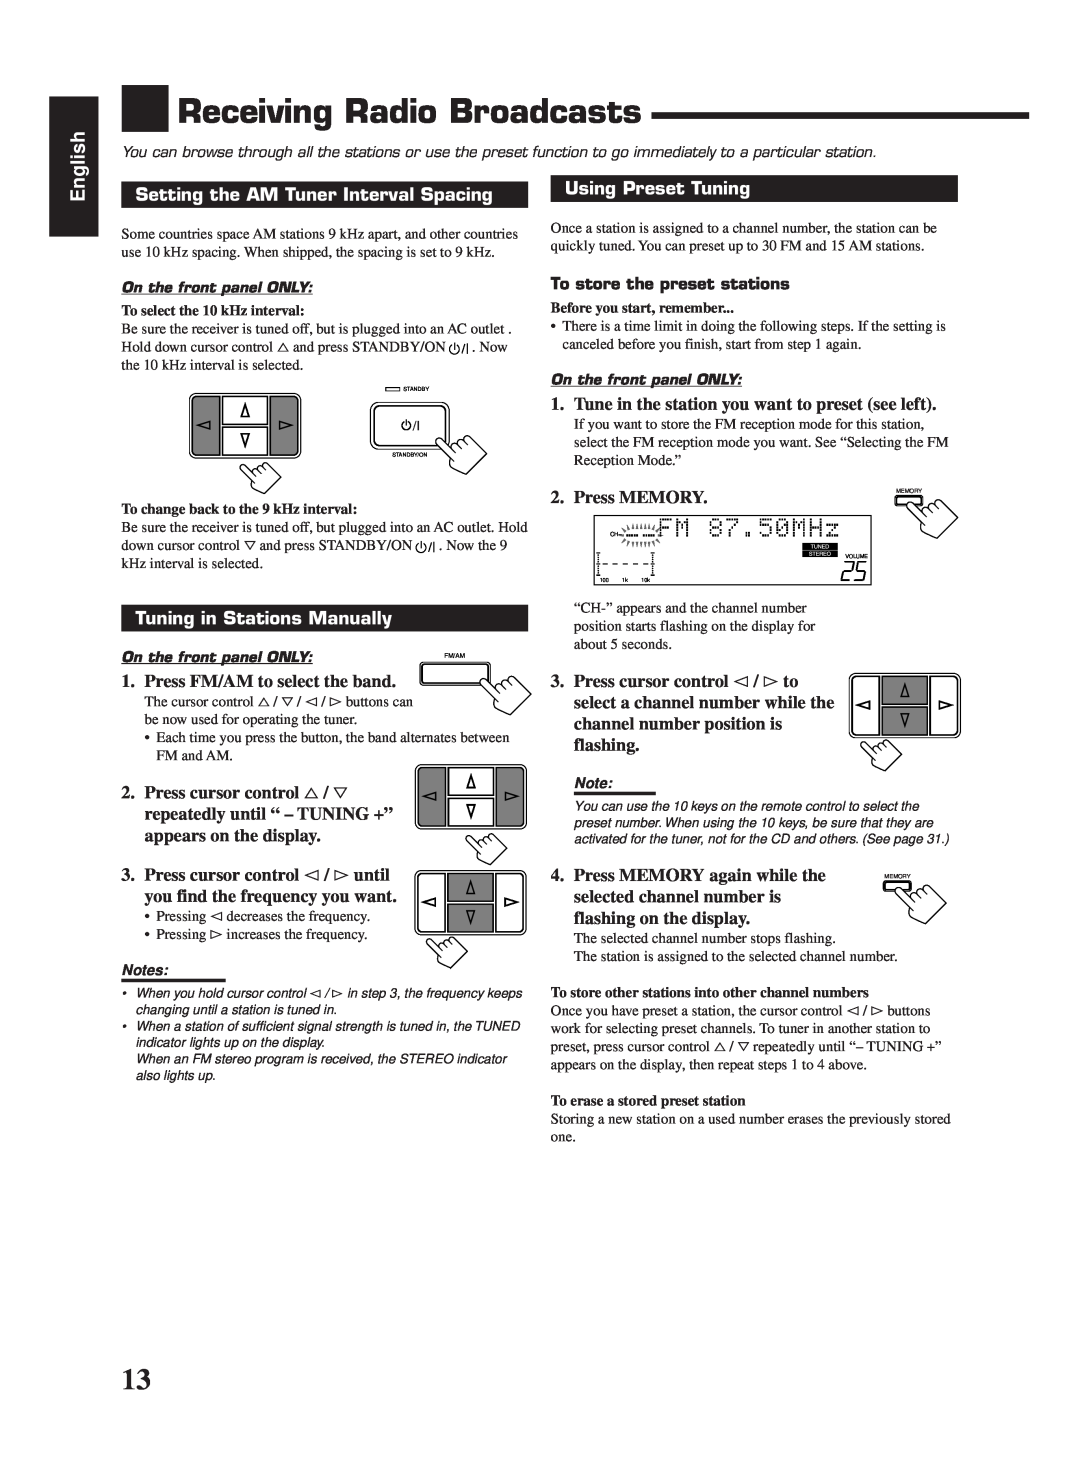 JVC RX-669PGD manual Receiving Radio Broadcasts, English, Setting the AM Tuner Interval Spacing, Using Preset Tuning 